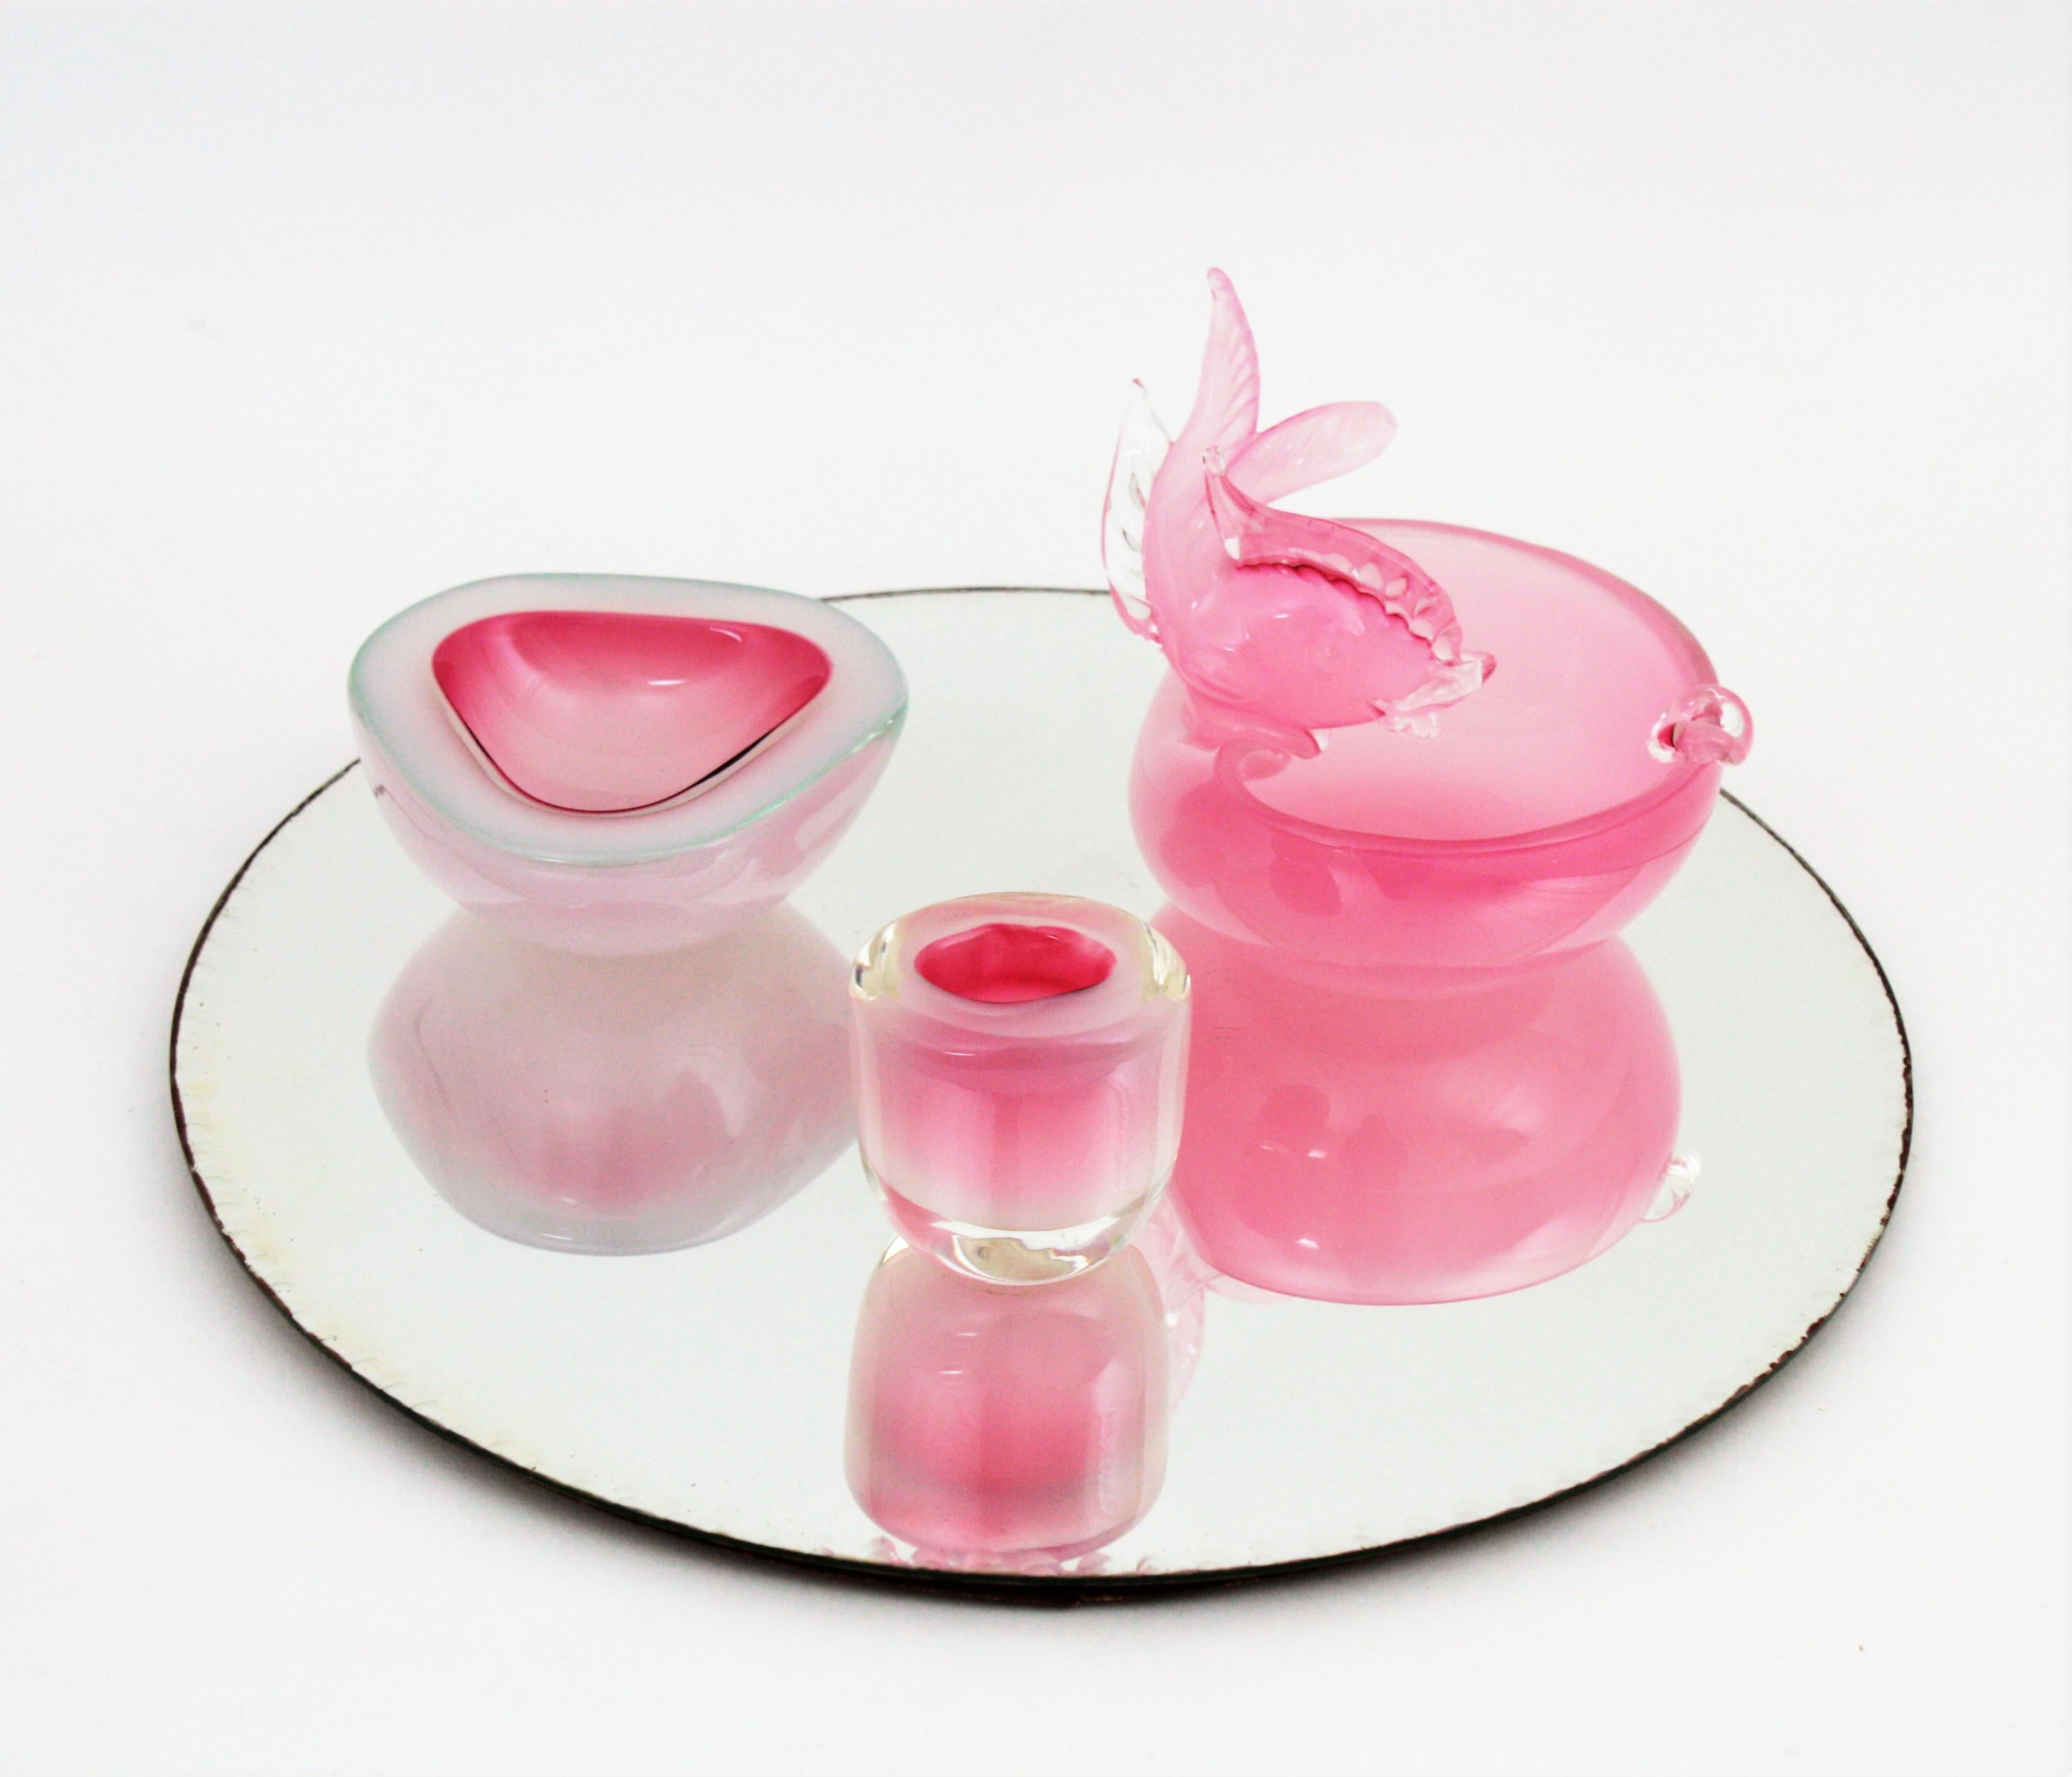 Archimede Seguso Murano Opal Pink Alabastro Fish Bowl or Ashtray, Italy, 1950s For Sale 3